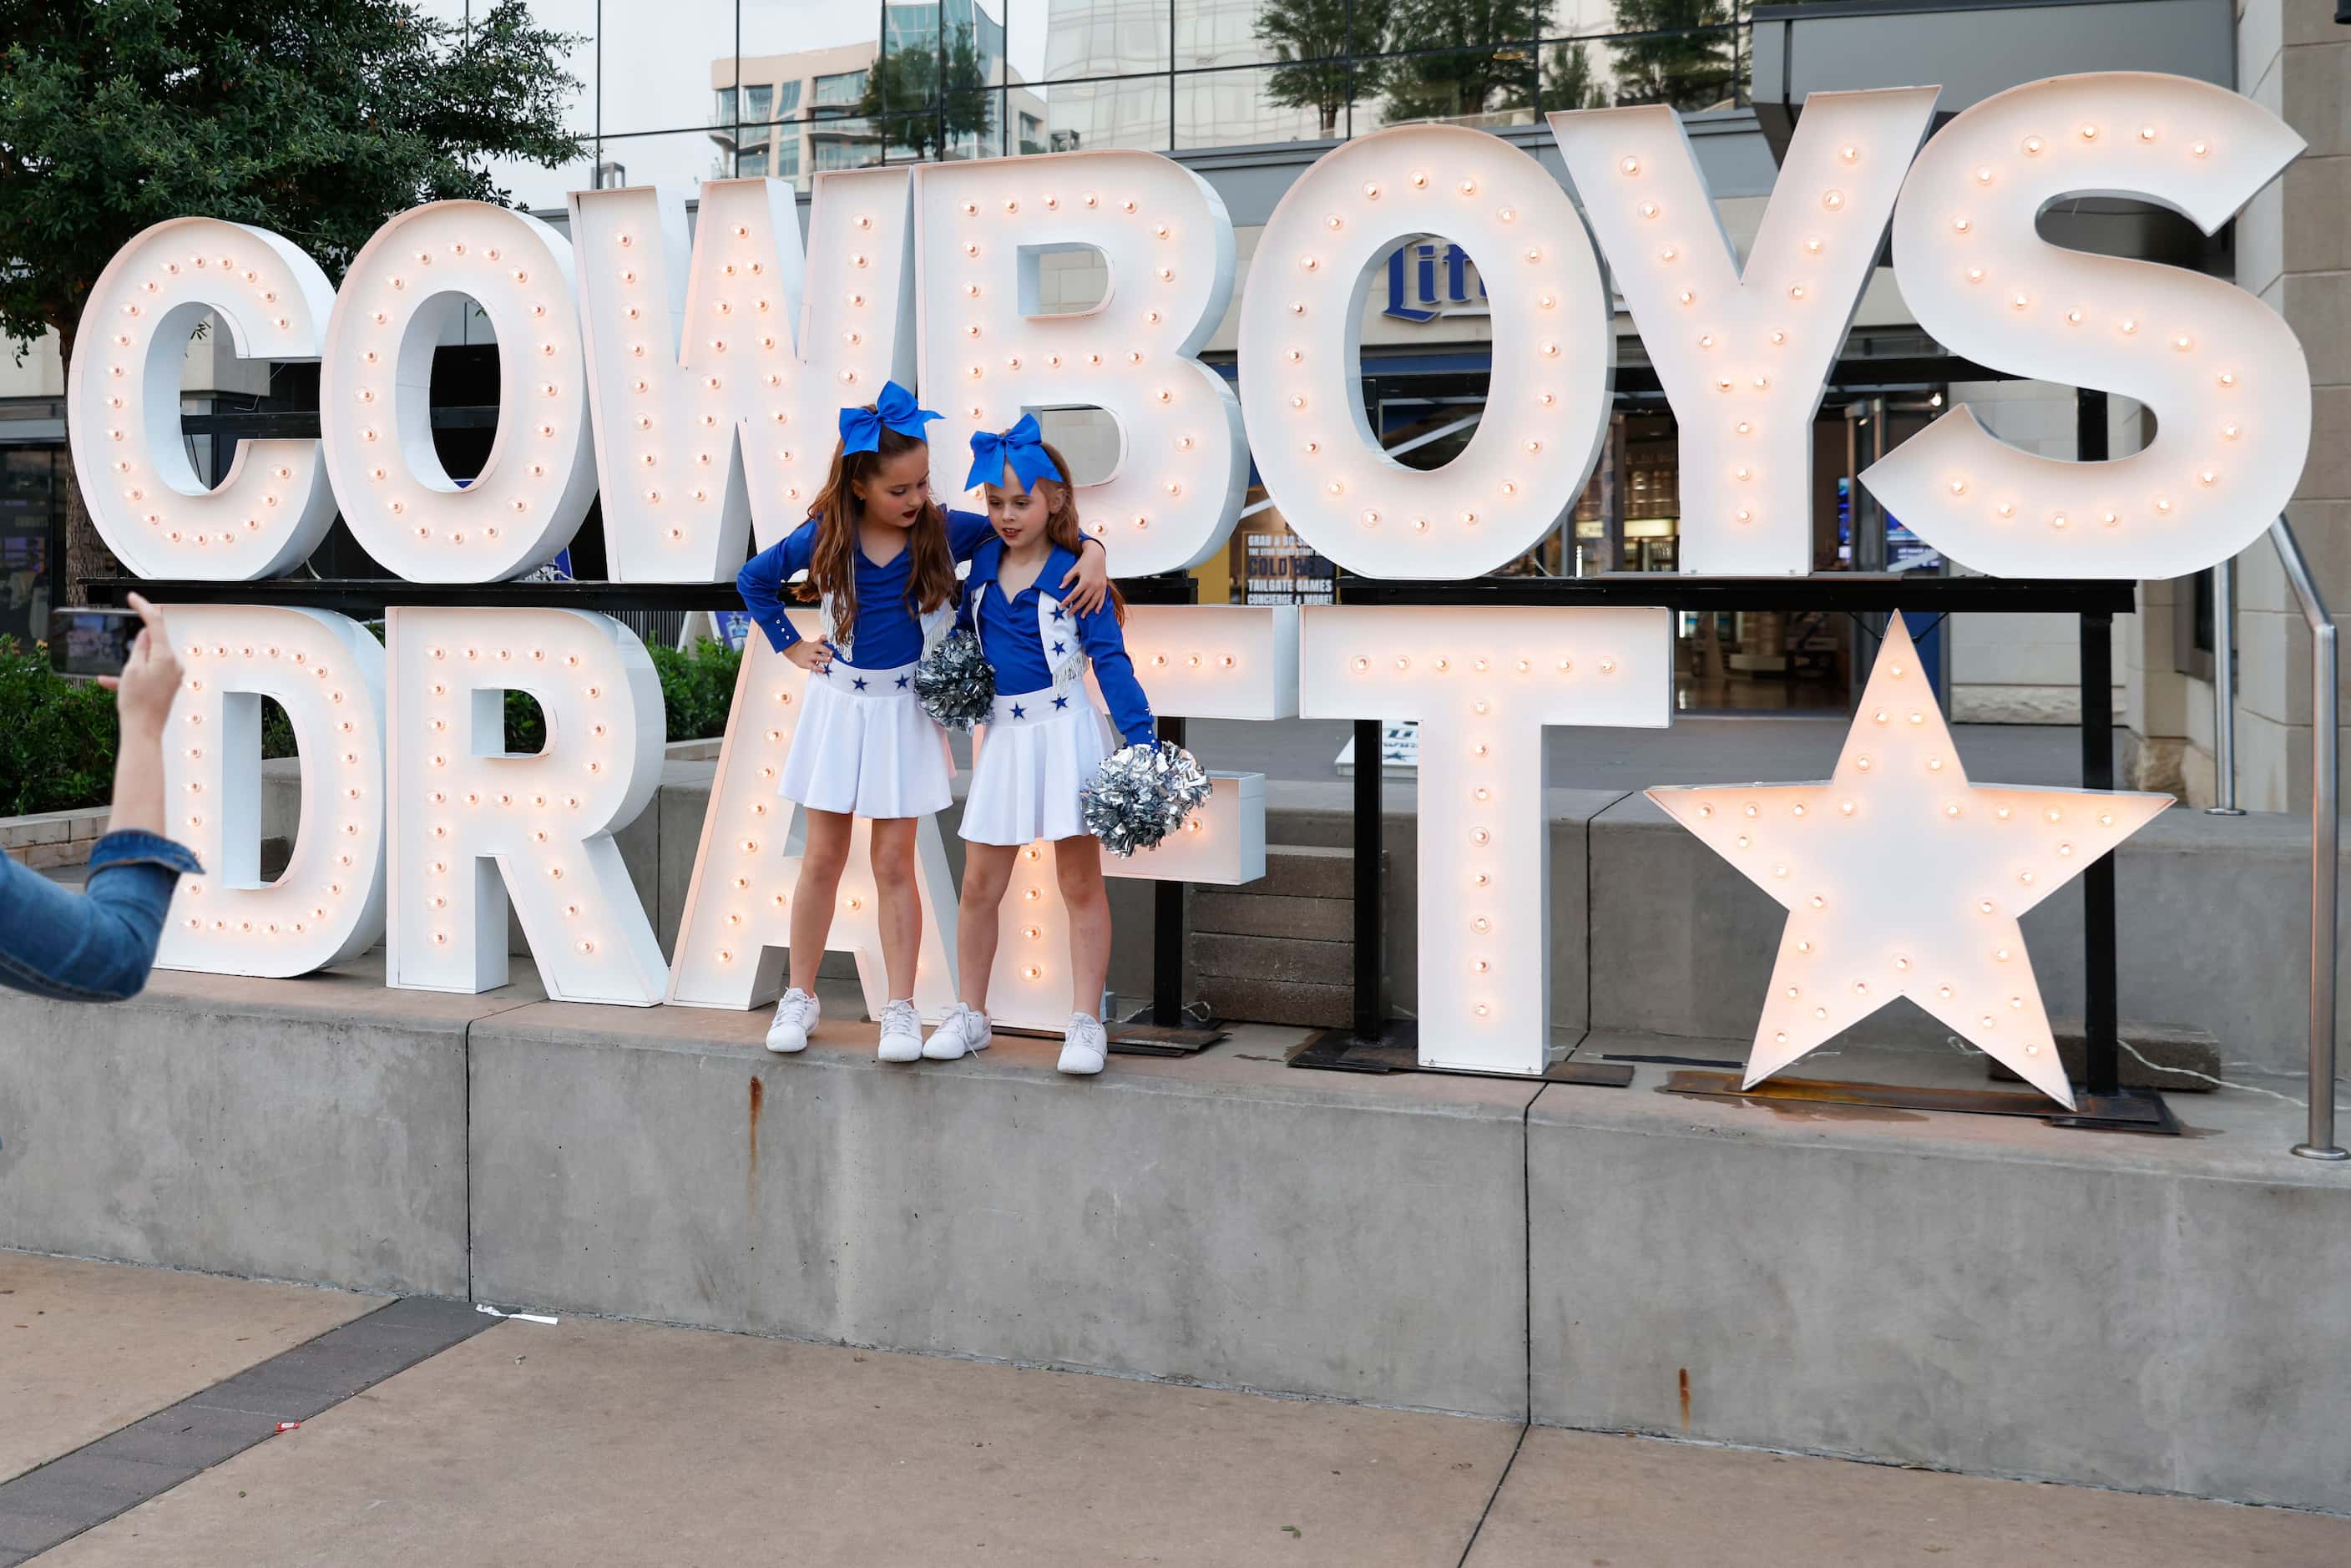 Amelia Purdue, 9, (left) with her friend Hannah Paulek, 9, pose for a photo, wearing Dallas...